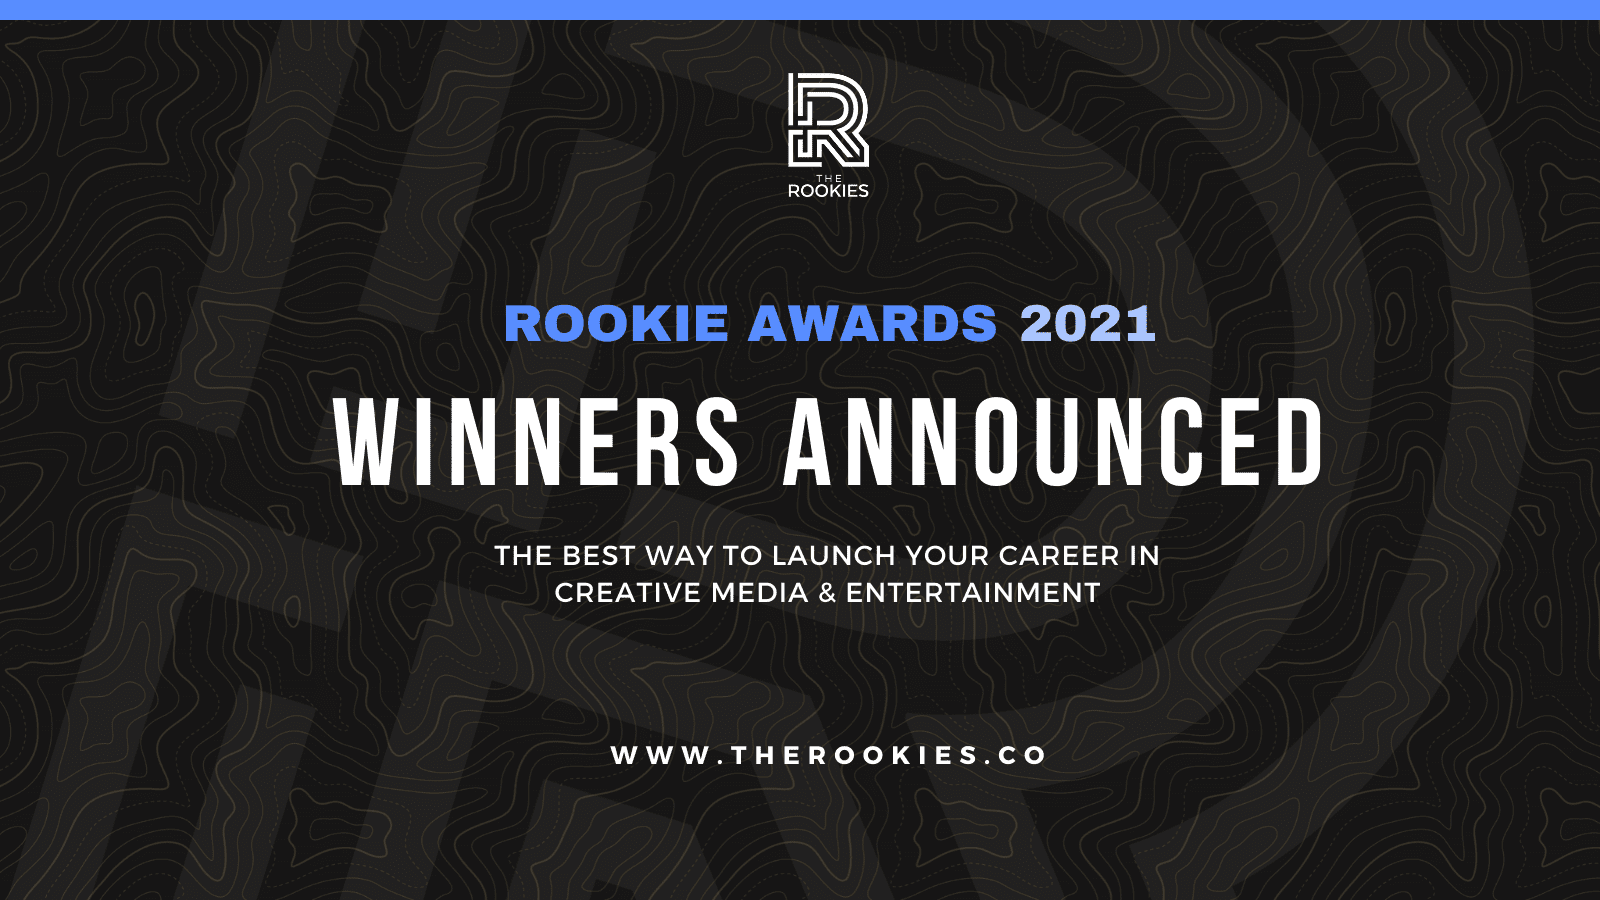 The Rookies Announce Winners for Rookie Awards 2021